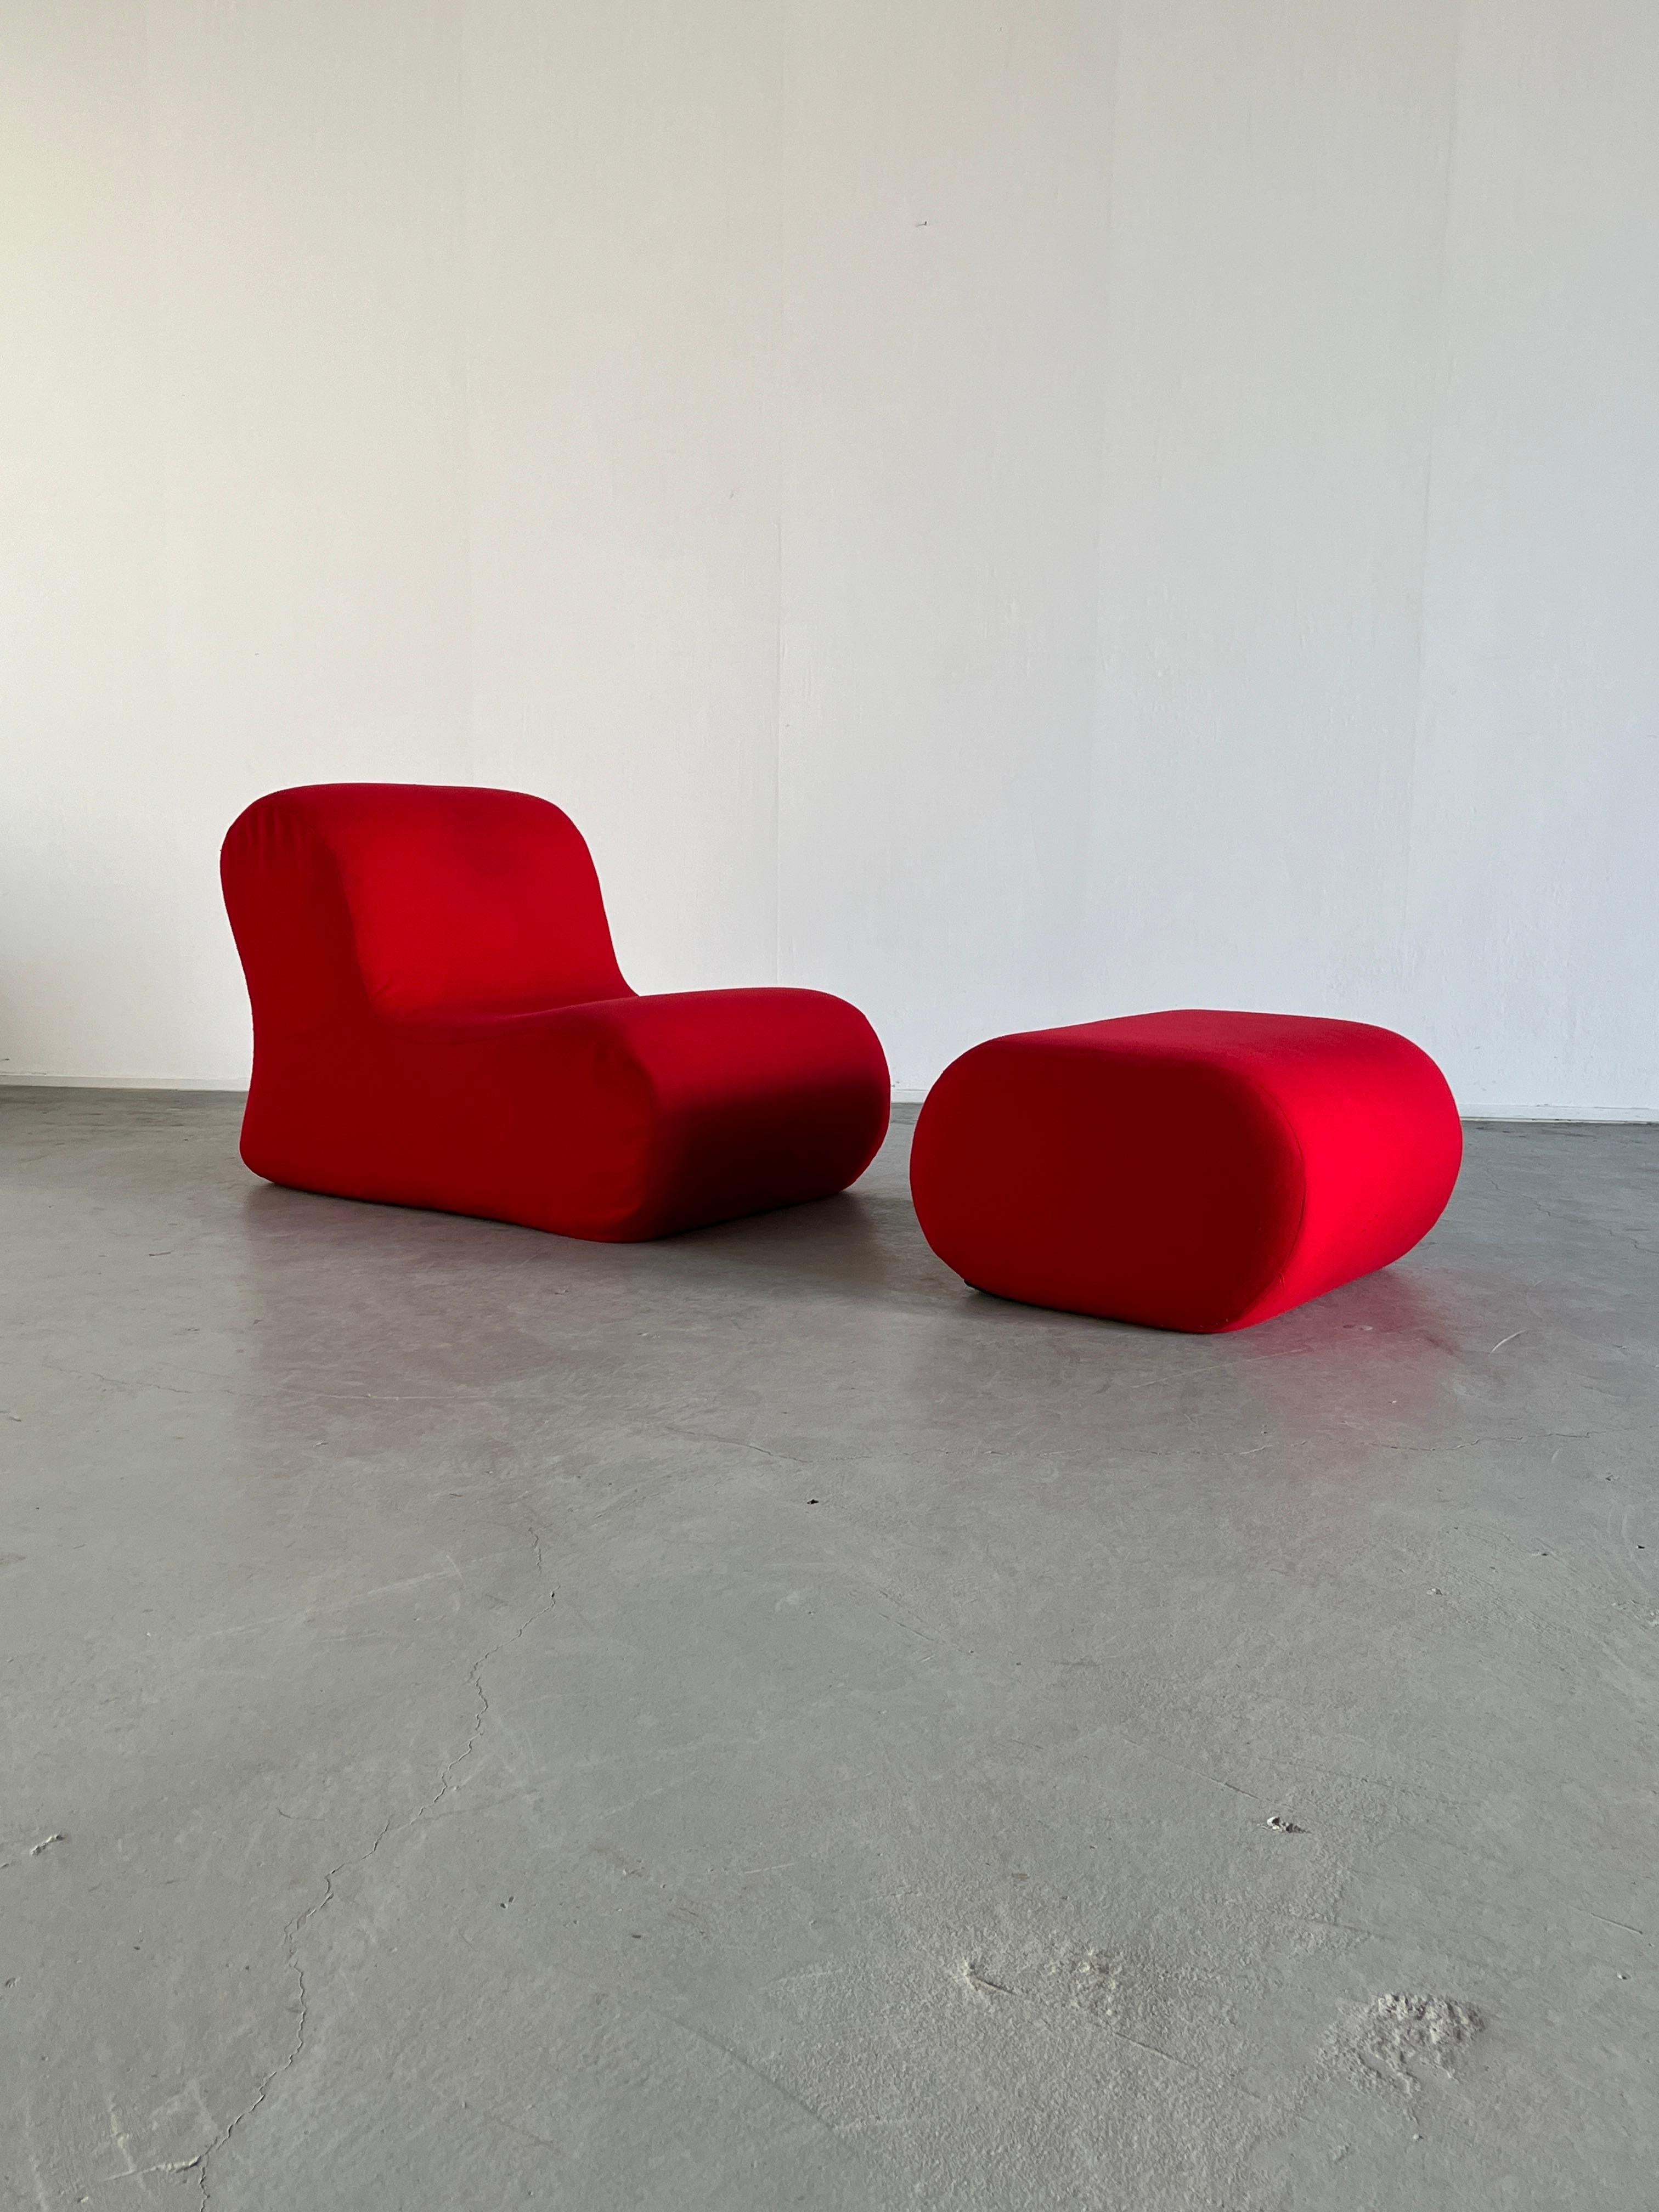 A stunning vintage Italian lounge set from the 1960s, attributed to Roberto Matta for Gavina.
Possibly a unit prototype of the iconic 'Malitta' seating set.

Most certainly one of the early works in the lounge foam style that connected authors in